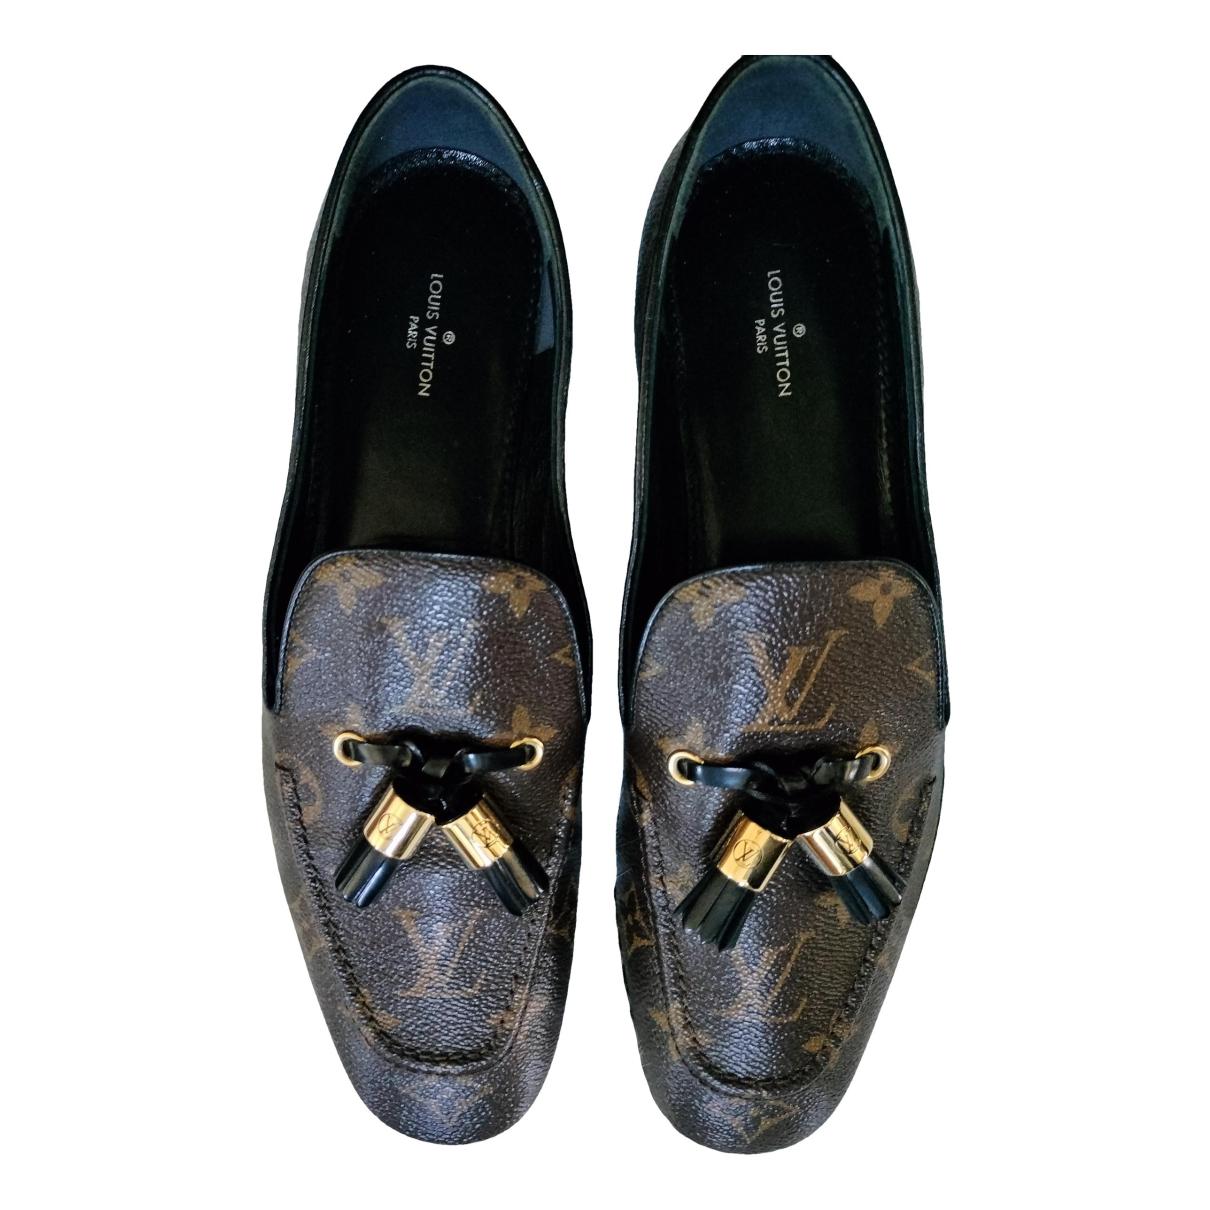 Louis Vuitton Shoes for women  Buy or Sell LV shoes - Vestiaire Collective